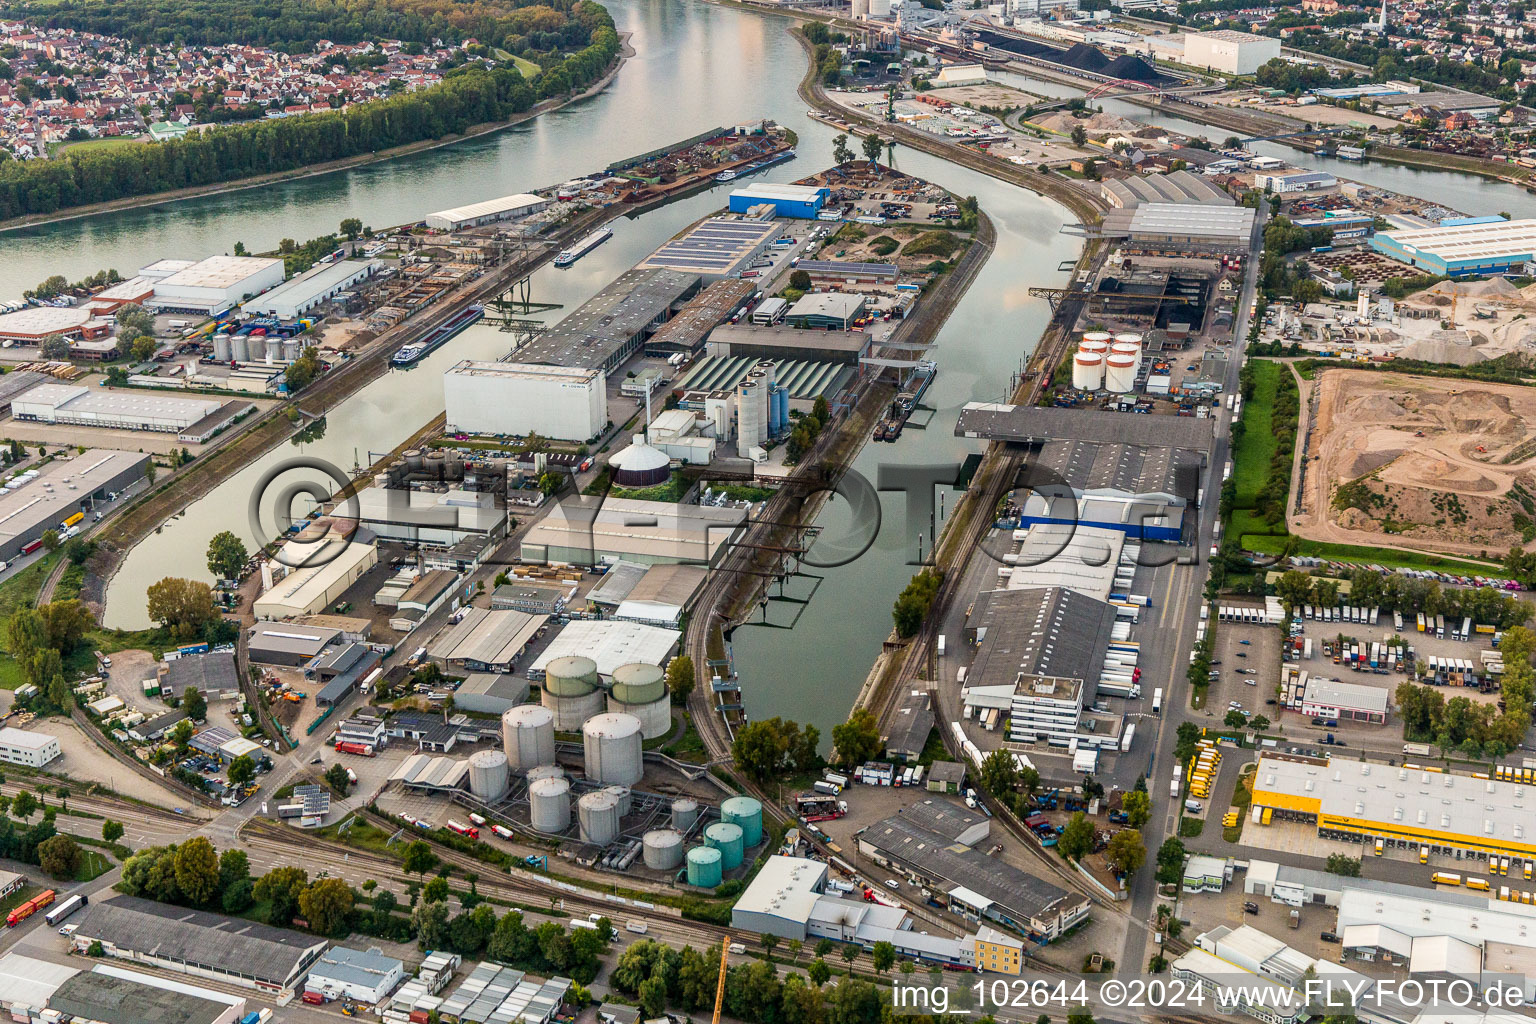 Aerial photograpy of Quays and boat moorings at the port of the inland port Rheinauhafen on Rhine in the district Rheinau in Mannheim in the state Baden-Wurttemberg, Germany